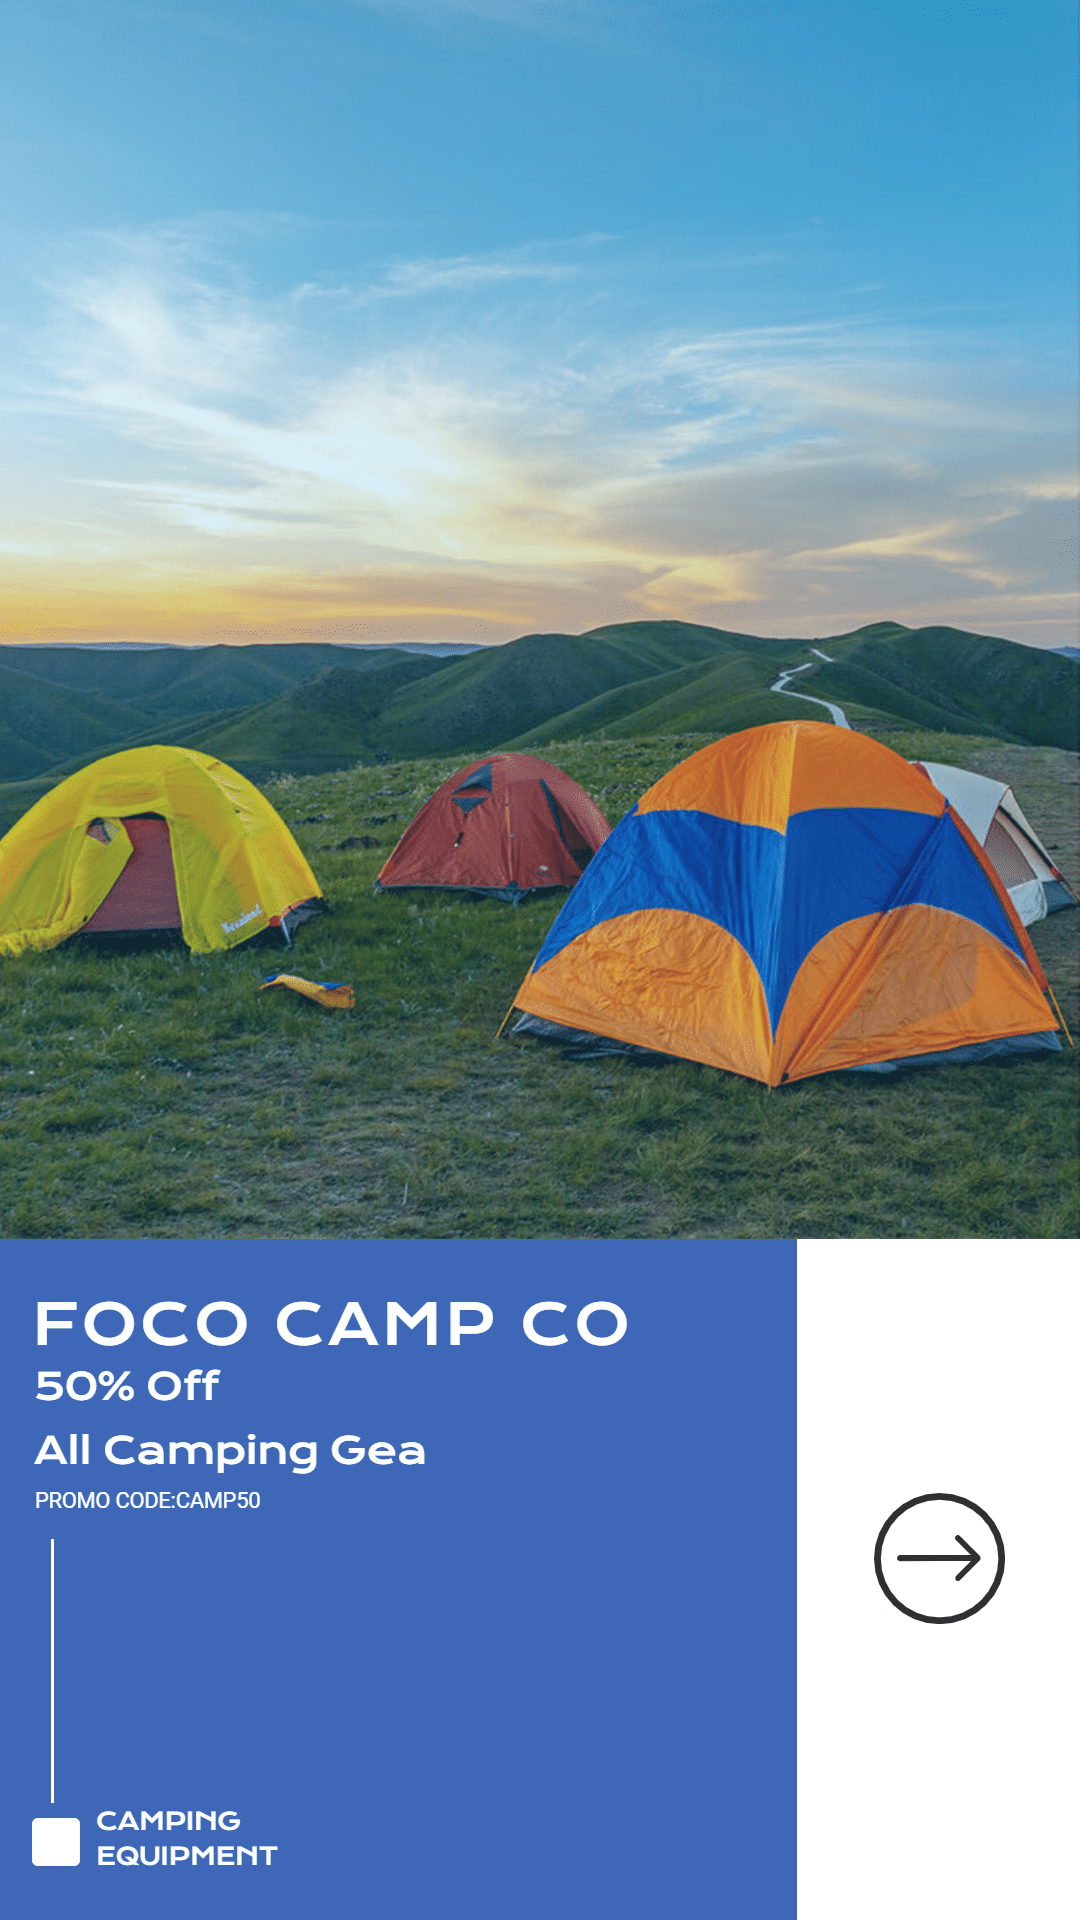 Simple Camping Equipment Discount Ecommerce Story预览效果